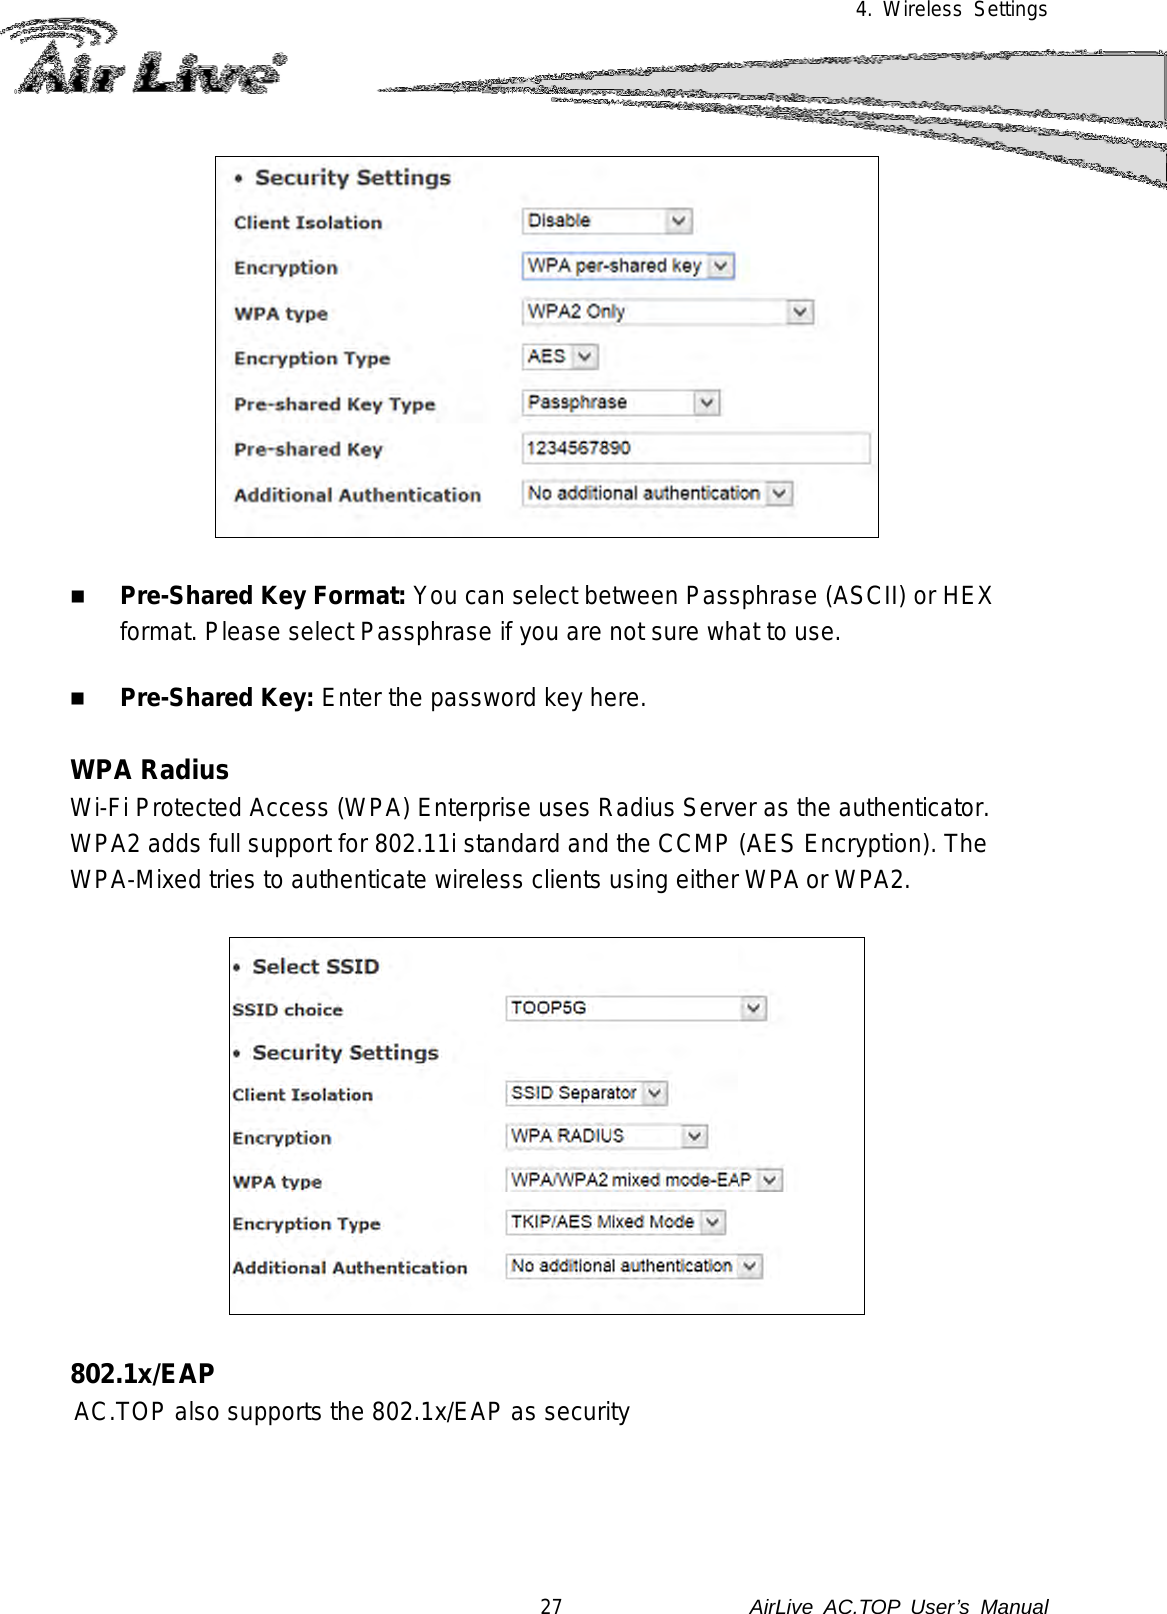 4. Wireless Settings     Pre-Shared Key Format: You can select between Passphrase (ASCII) or HEX format. Please select Passphrase if you are not sure what to use.   Pre-Shared Key: Enter the password key here.  WPA Radius Wi-Fi Protected Access (WPA) Enterprise uses Radius Server as the authenticator.   WPA2 adds full support for 802.11i standard and the CCMP (AES Encryption). The WPA-Mixed tries to authenticate wireless clients using either WPA or WPA2.      802.1x/EAP AC.TOP also supports the 802.1x/EAP as security   27               AirLive  AC.TOP User’s Manual 